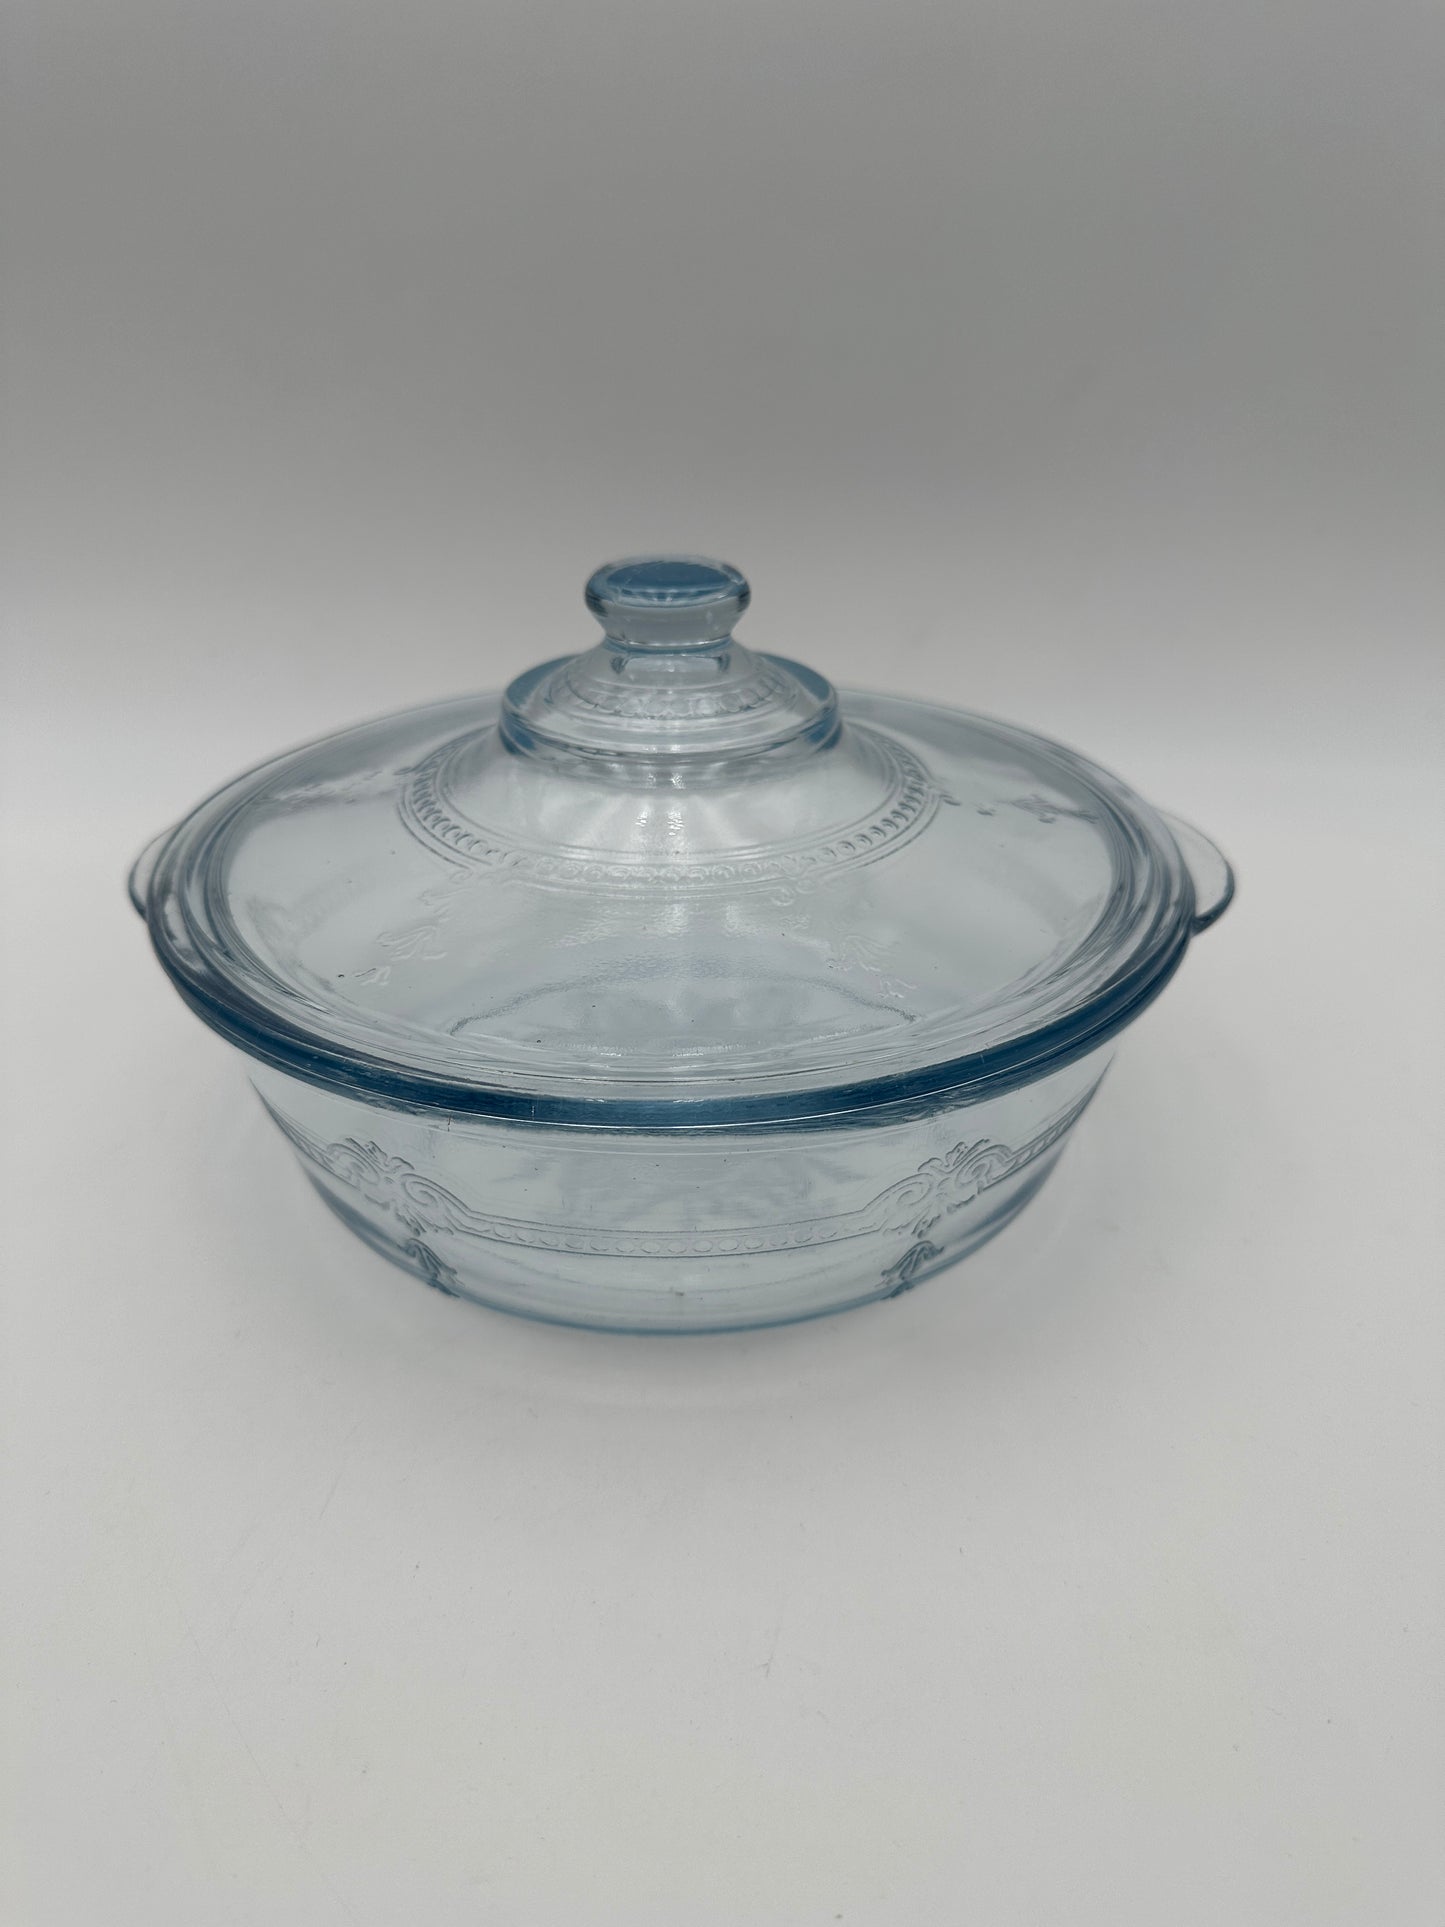 Anchor Hocking Fire King Philbe Sapphire Blue Vintage Covered Casserole Dish